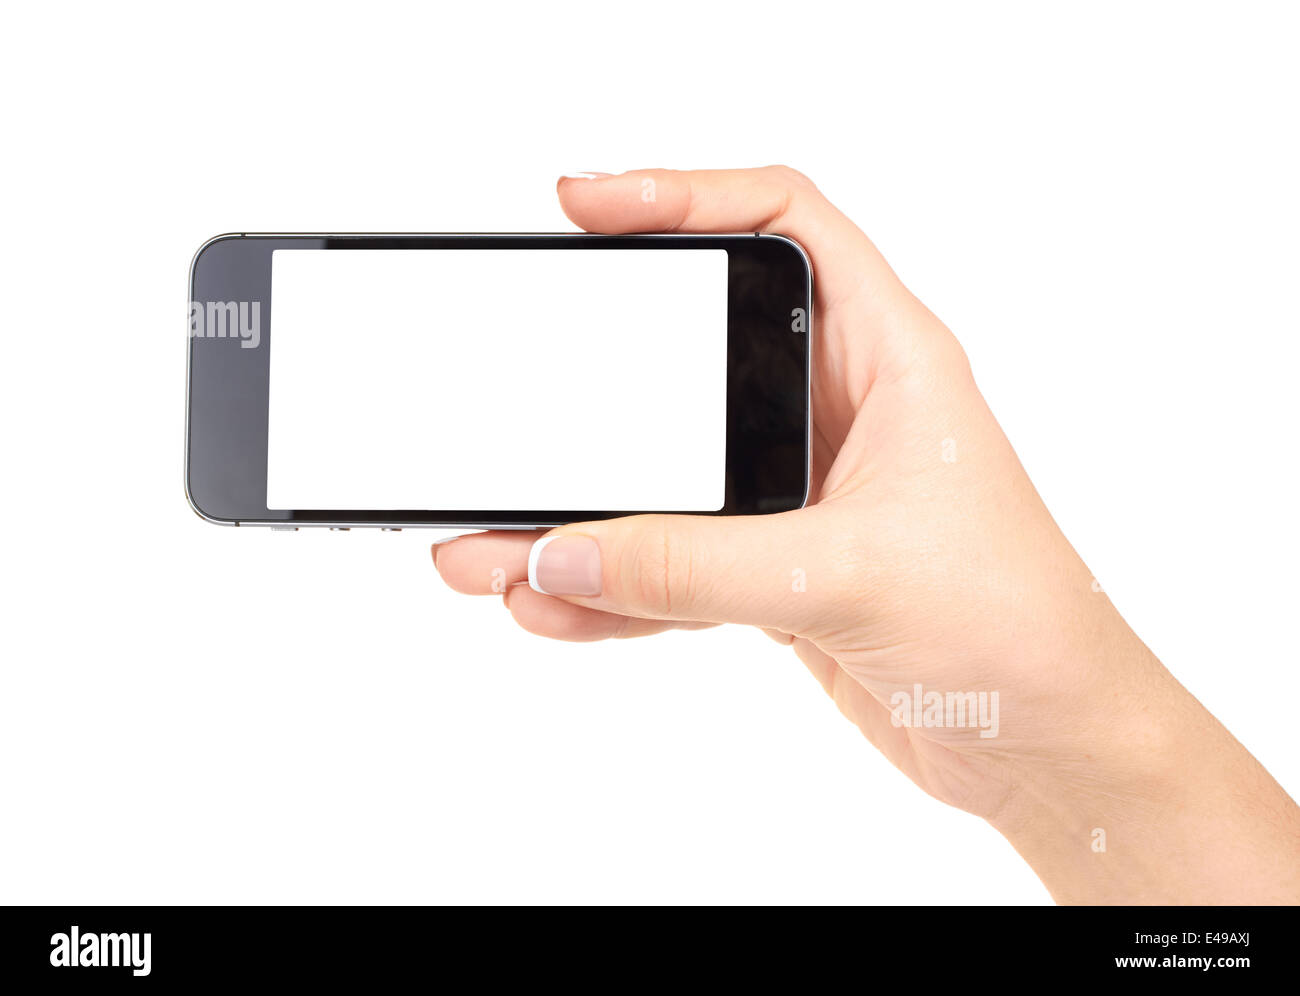 Hand holding mobile smart phone with blank screen, isolated on white Stock Photo